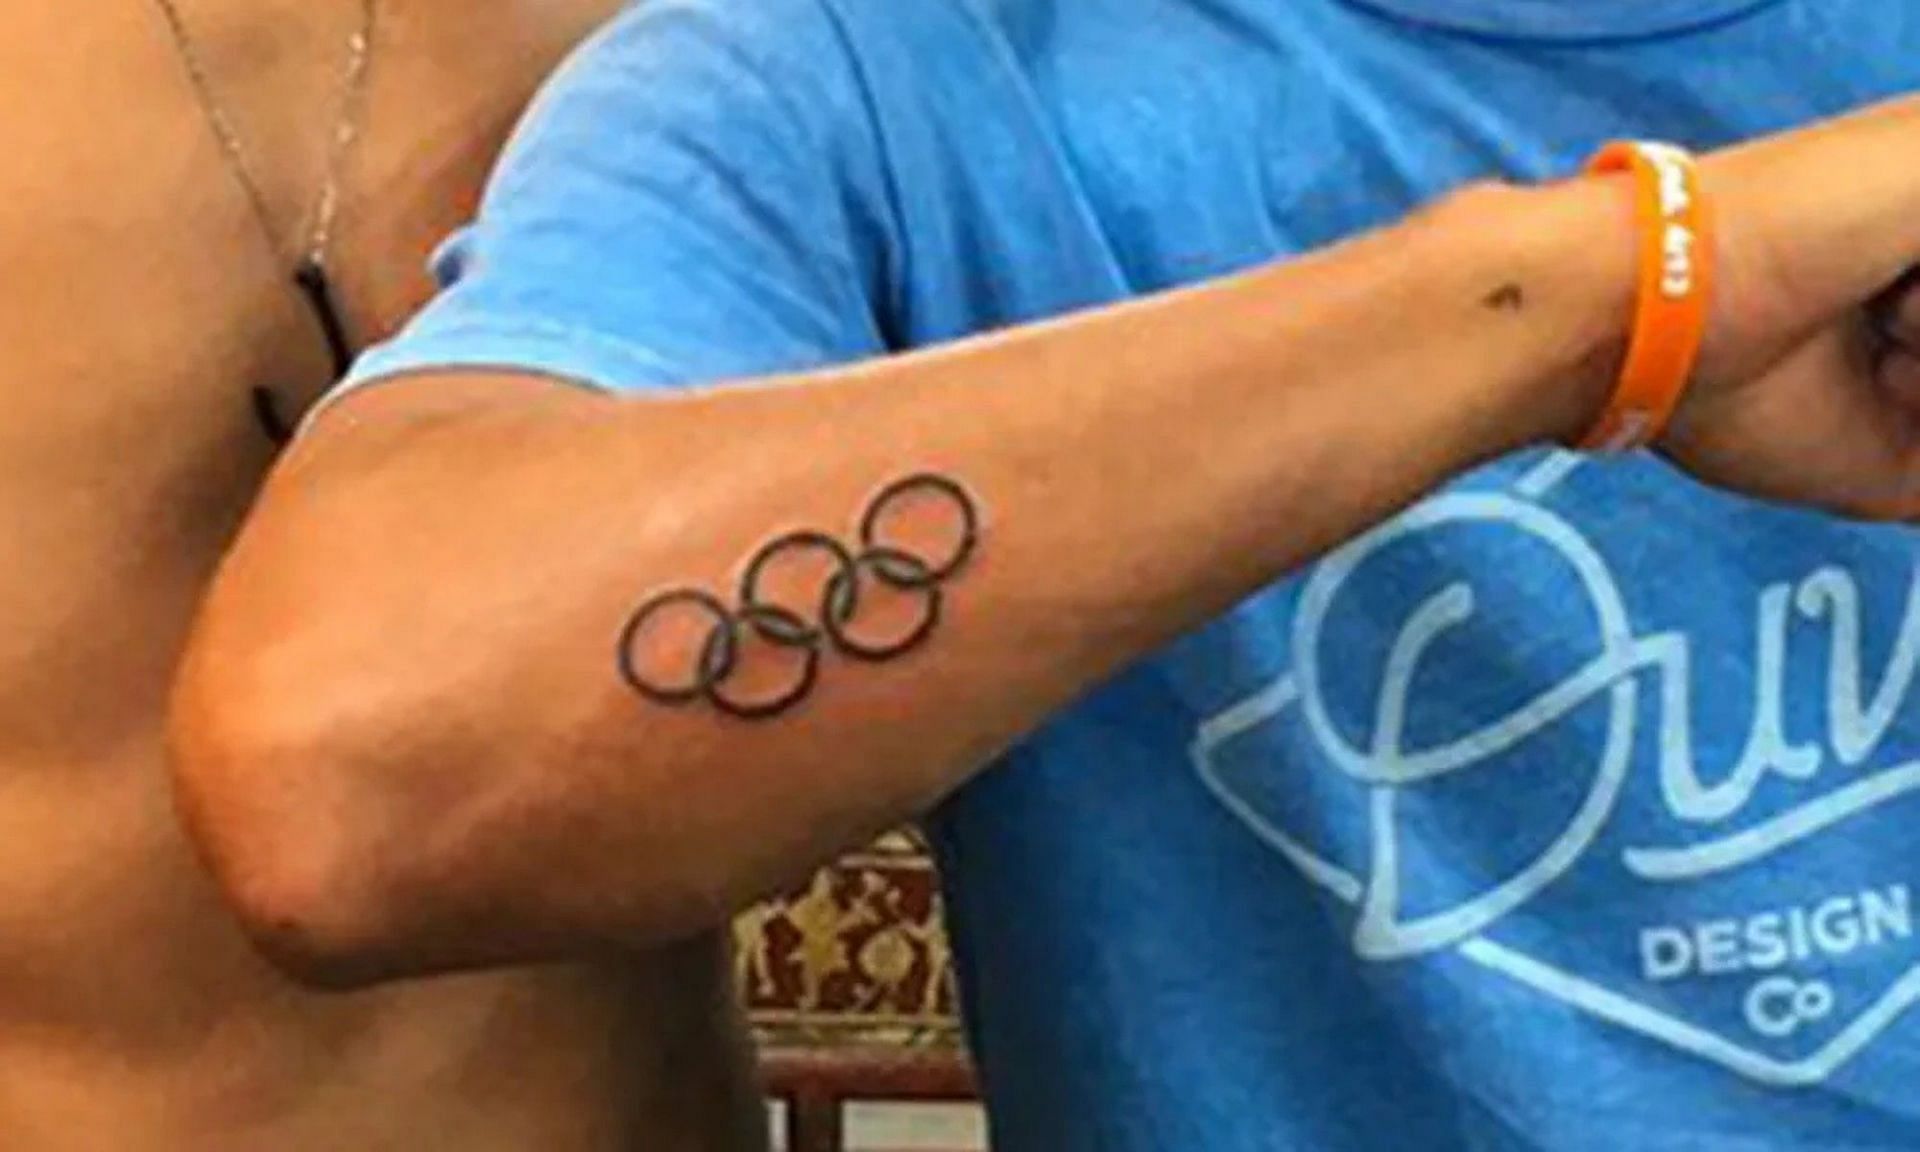 Tokyo Olympics: See athletes' tattoos honoring the games